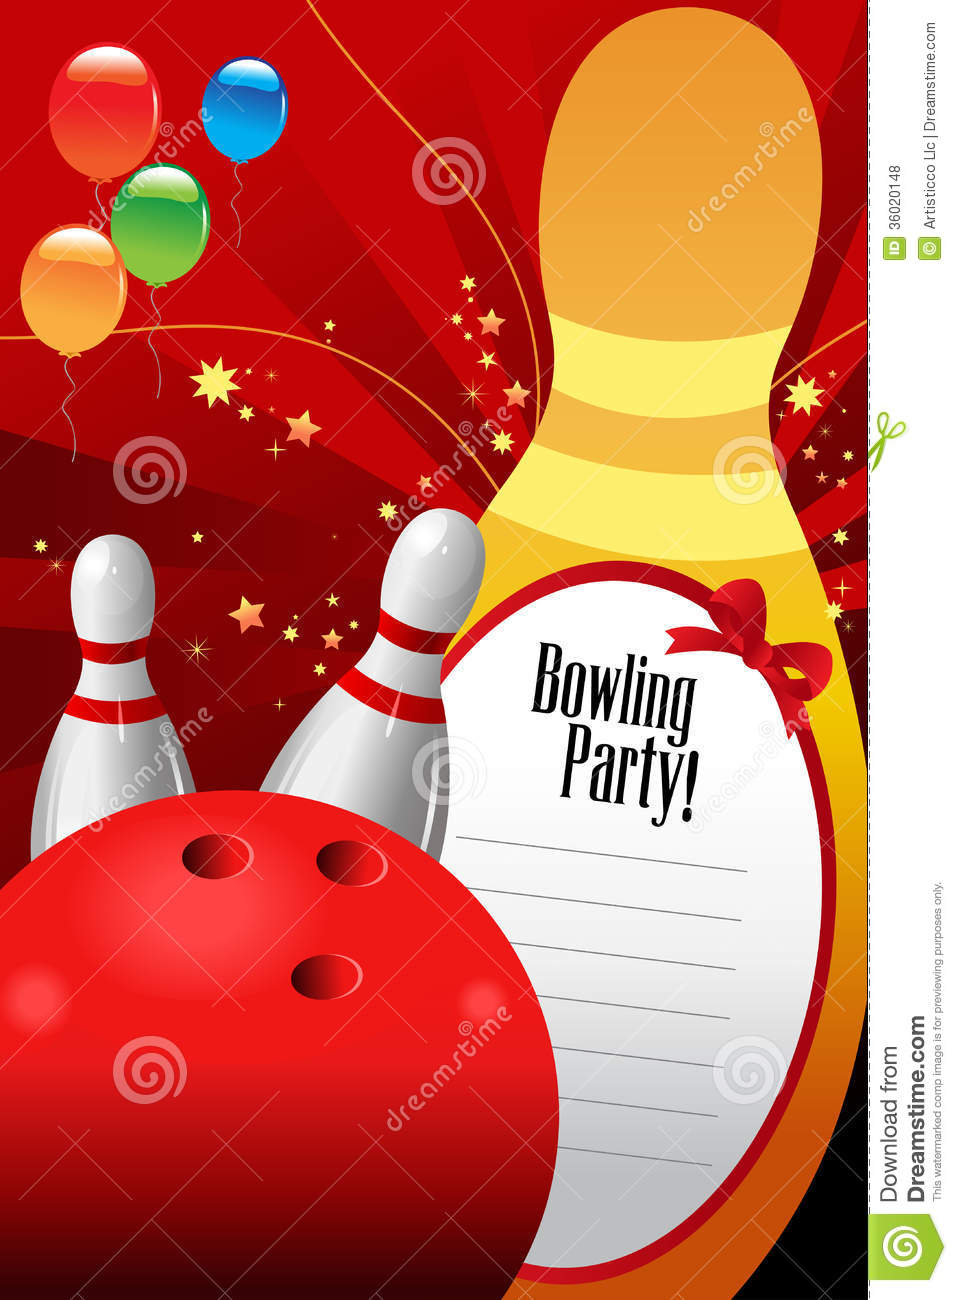 Bowling Party Invitation Template Stock Vector Illustration Of intended for dimensions 957 X 1300